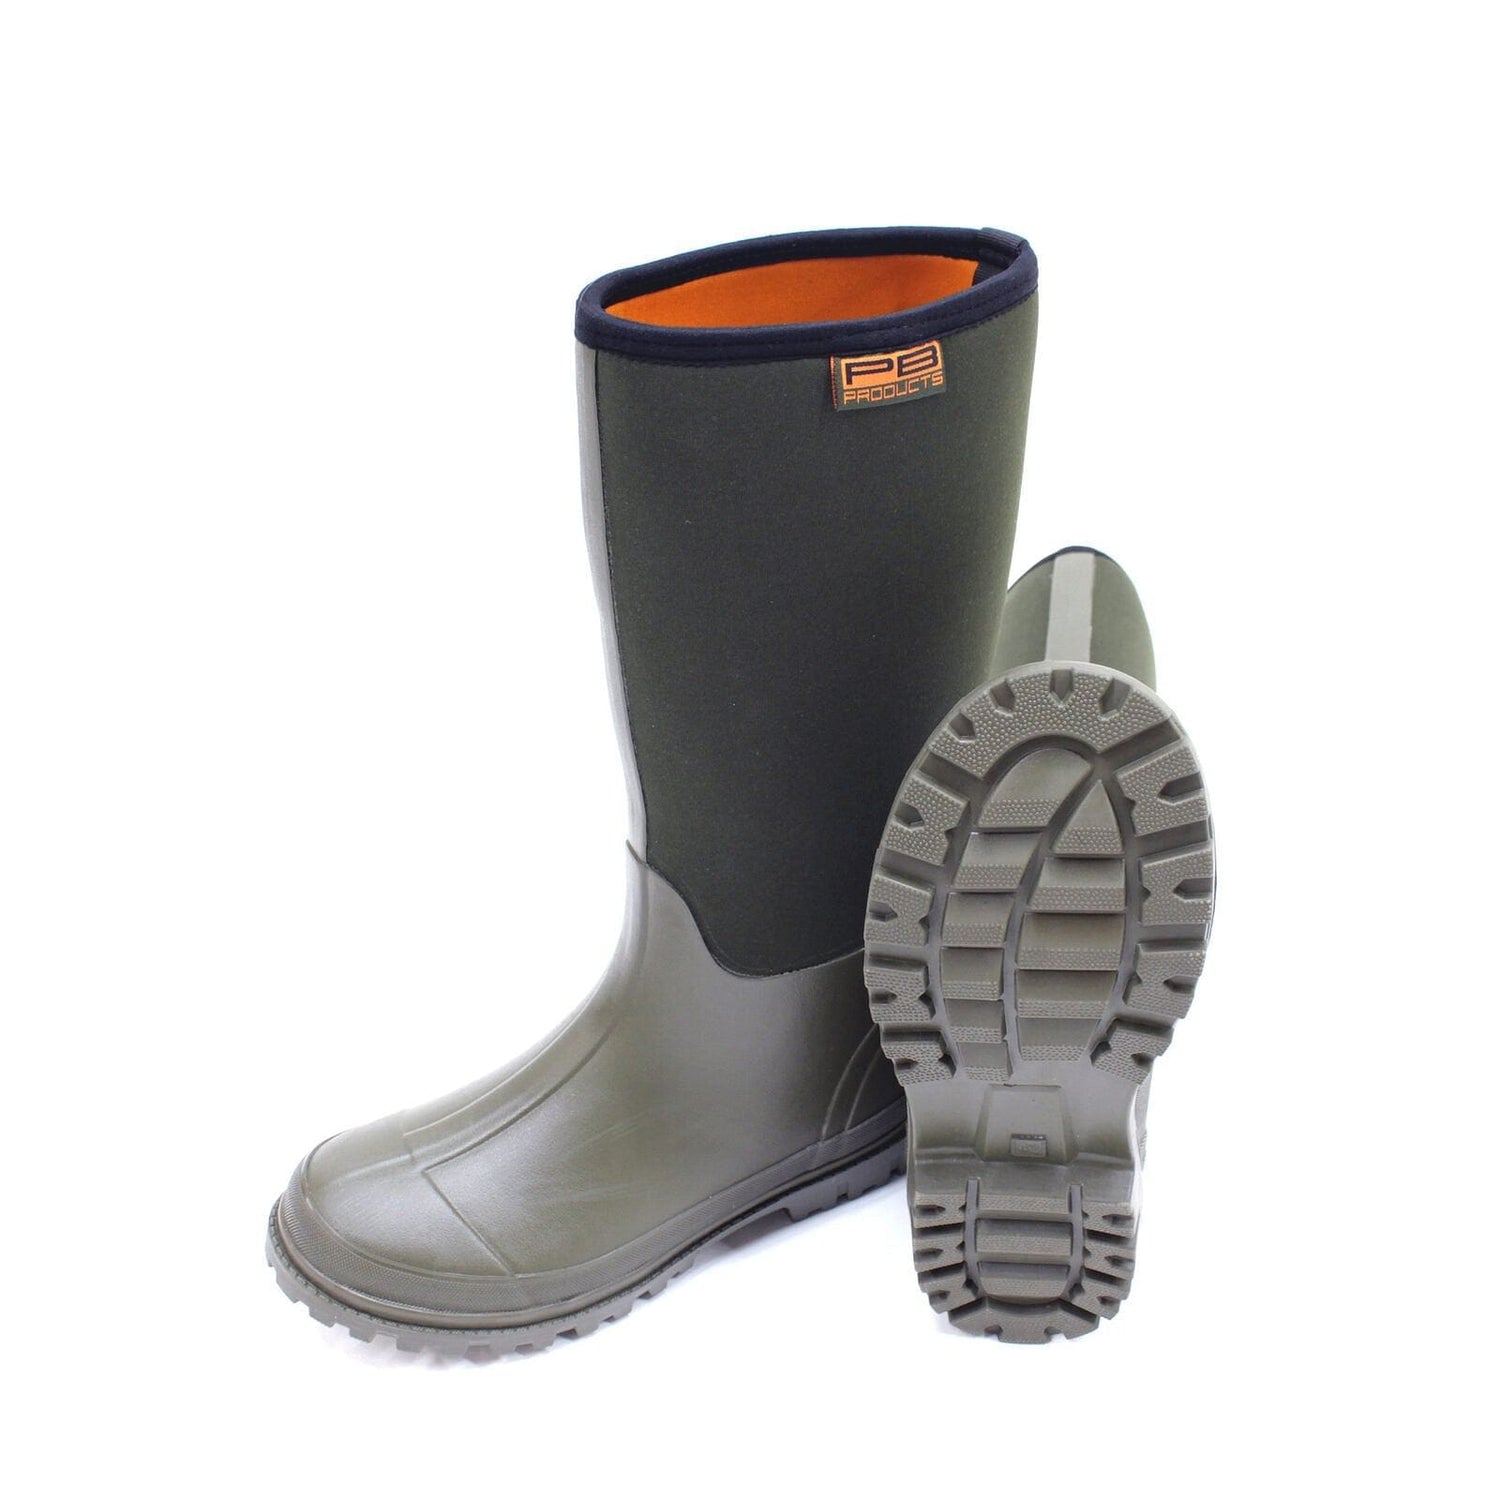 PB Products Neoprene Boots 6mm 39